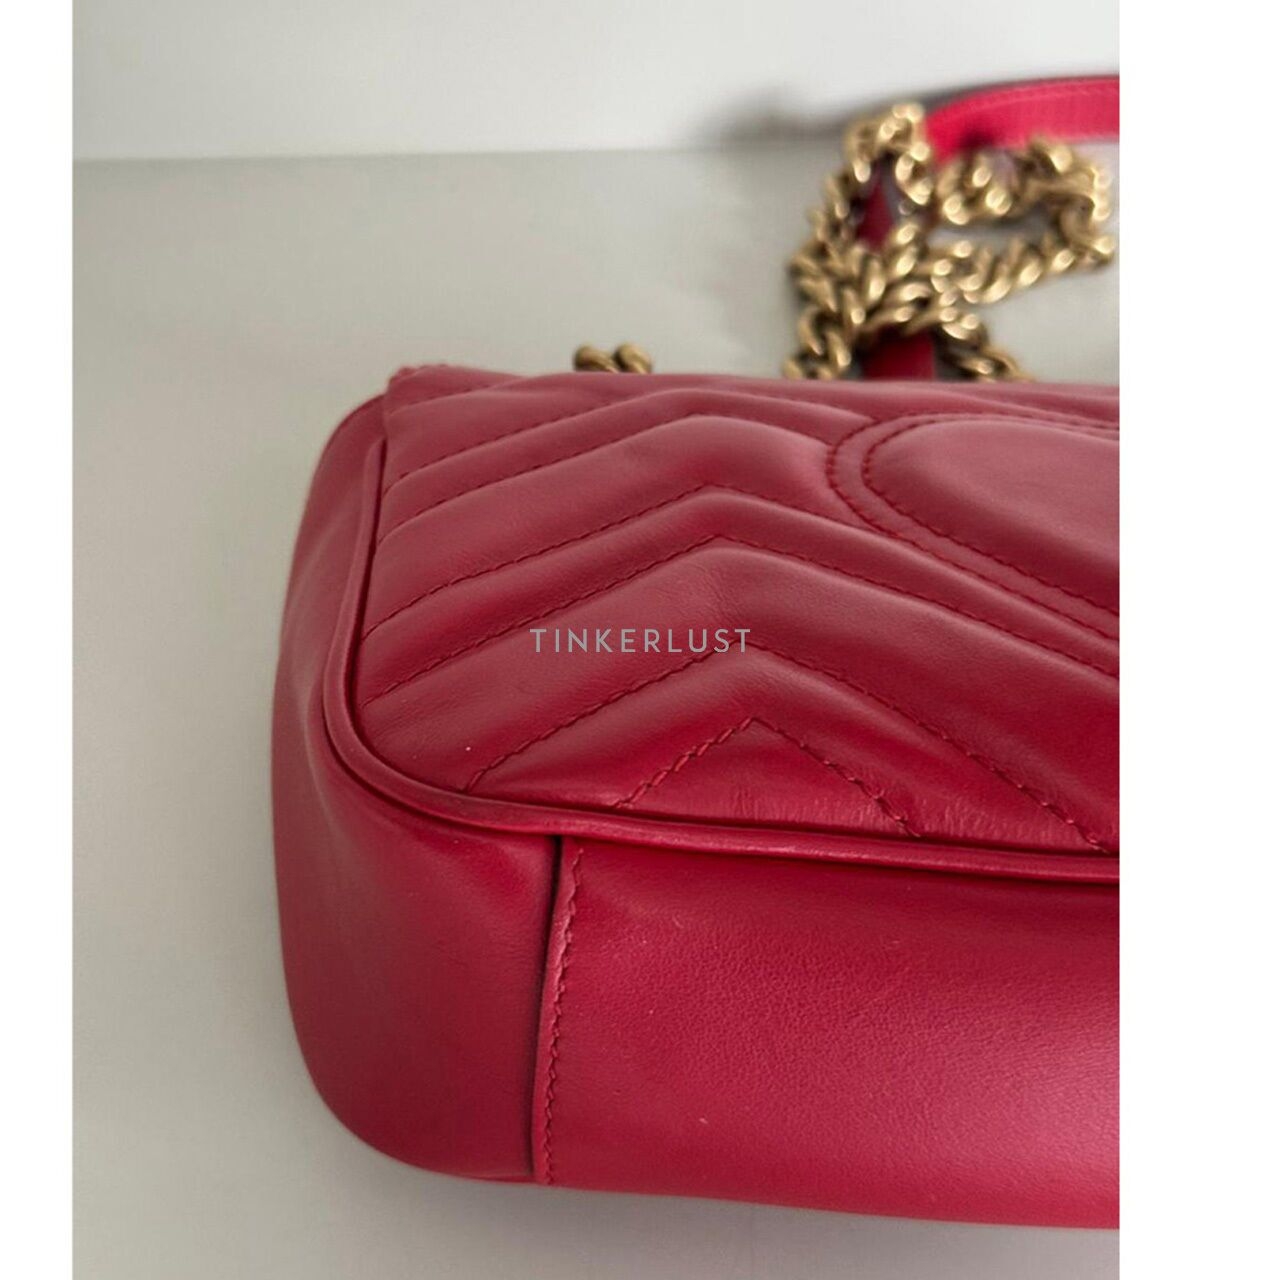 Gucci Marmont Red Mini Sling Bag